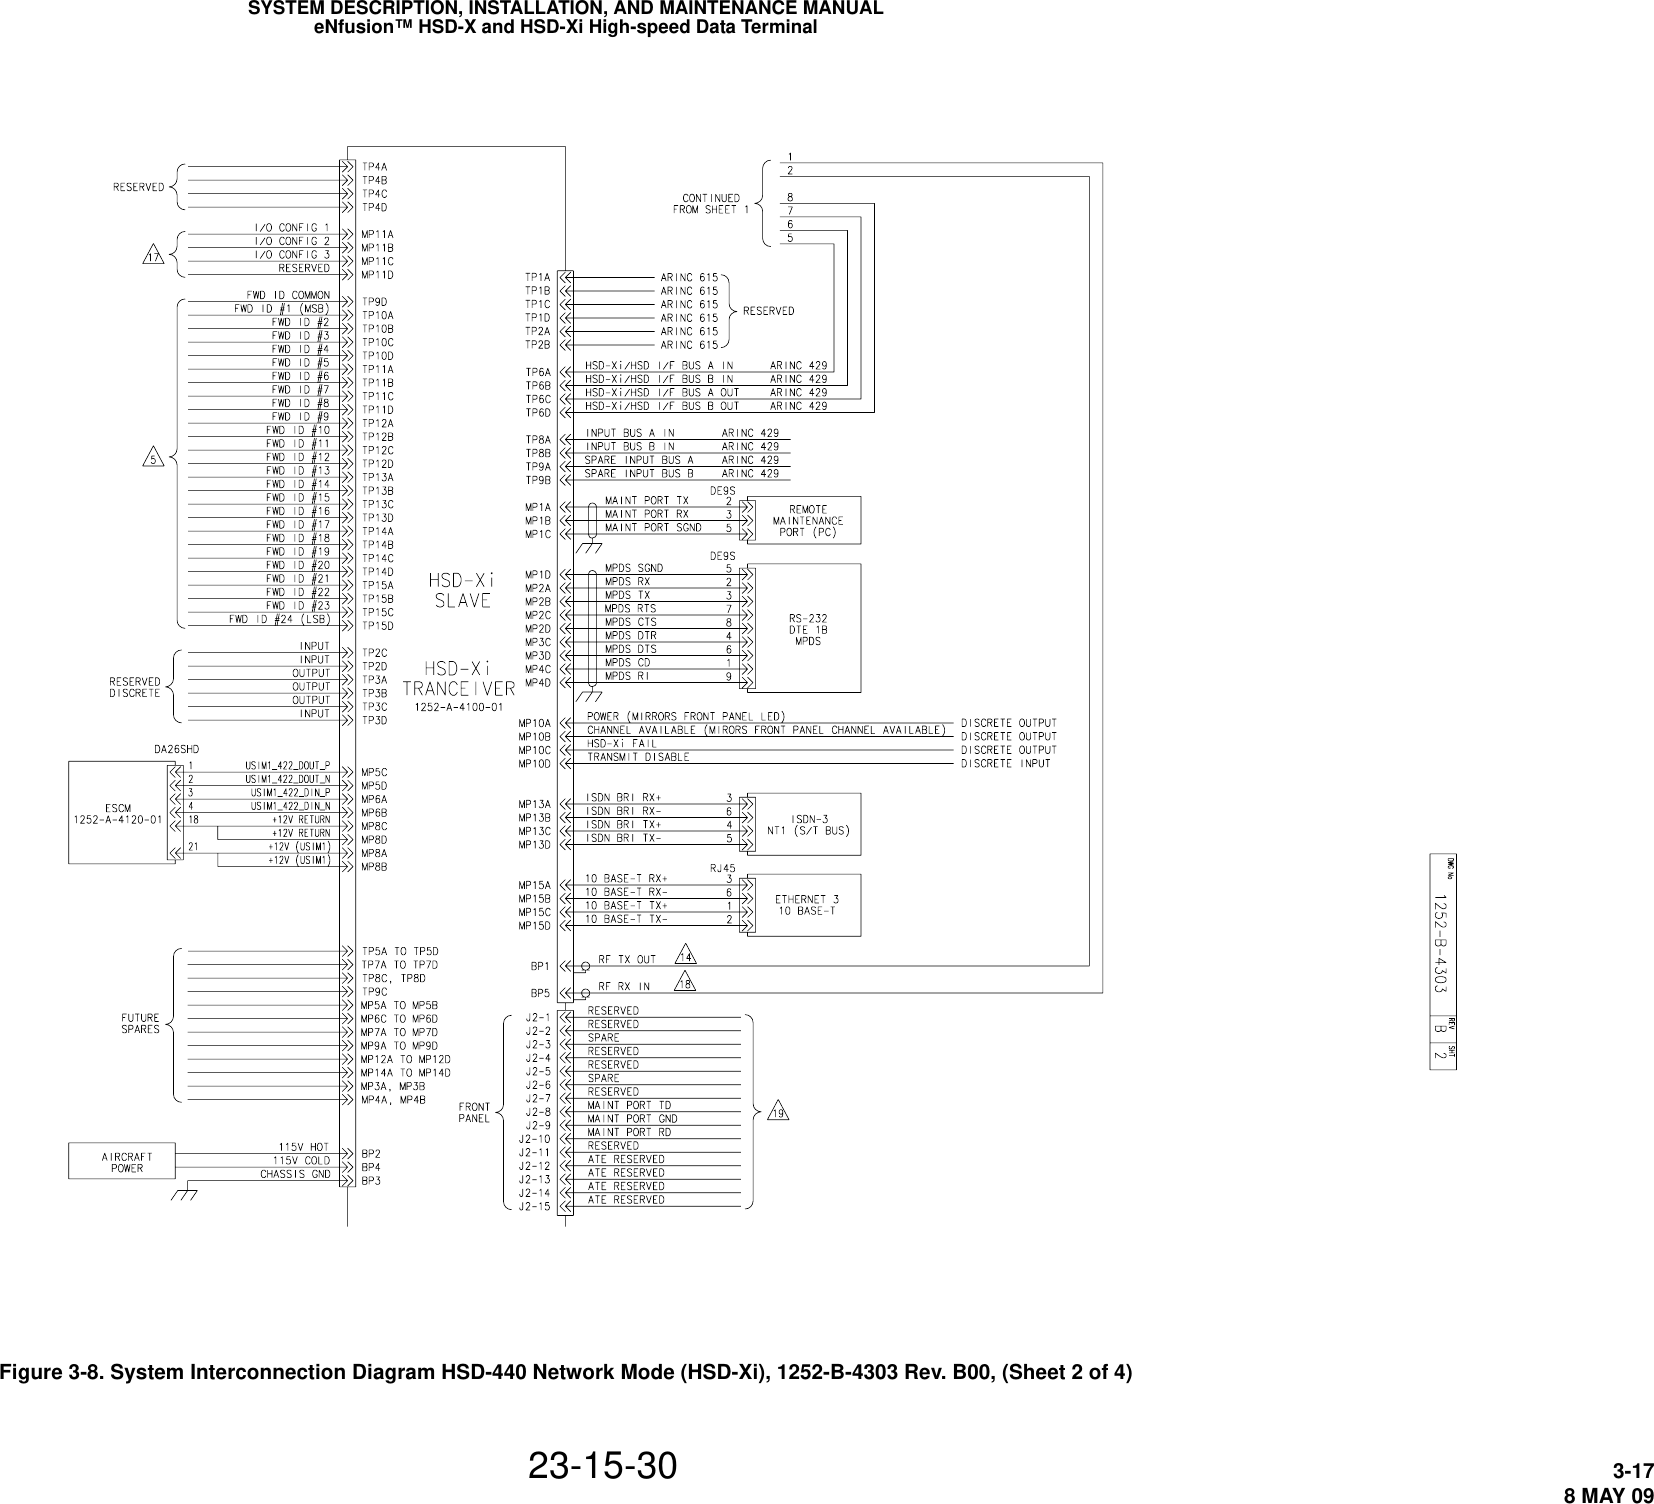 SYSTEM DESCRIPTION, INSTALLATION, AND MAINTENANCE MANUALeNfusion™ HSD-X and HSD-Xi High-speed Data Terminal23-15-30 3-178 MAY 09Figure 3-8. System Interconnection Diagram HSD-440 Network Mode (HSD-Xi), 1252-B-4303 Rev. B00, (Sheet 2 of 4)